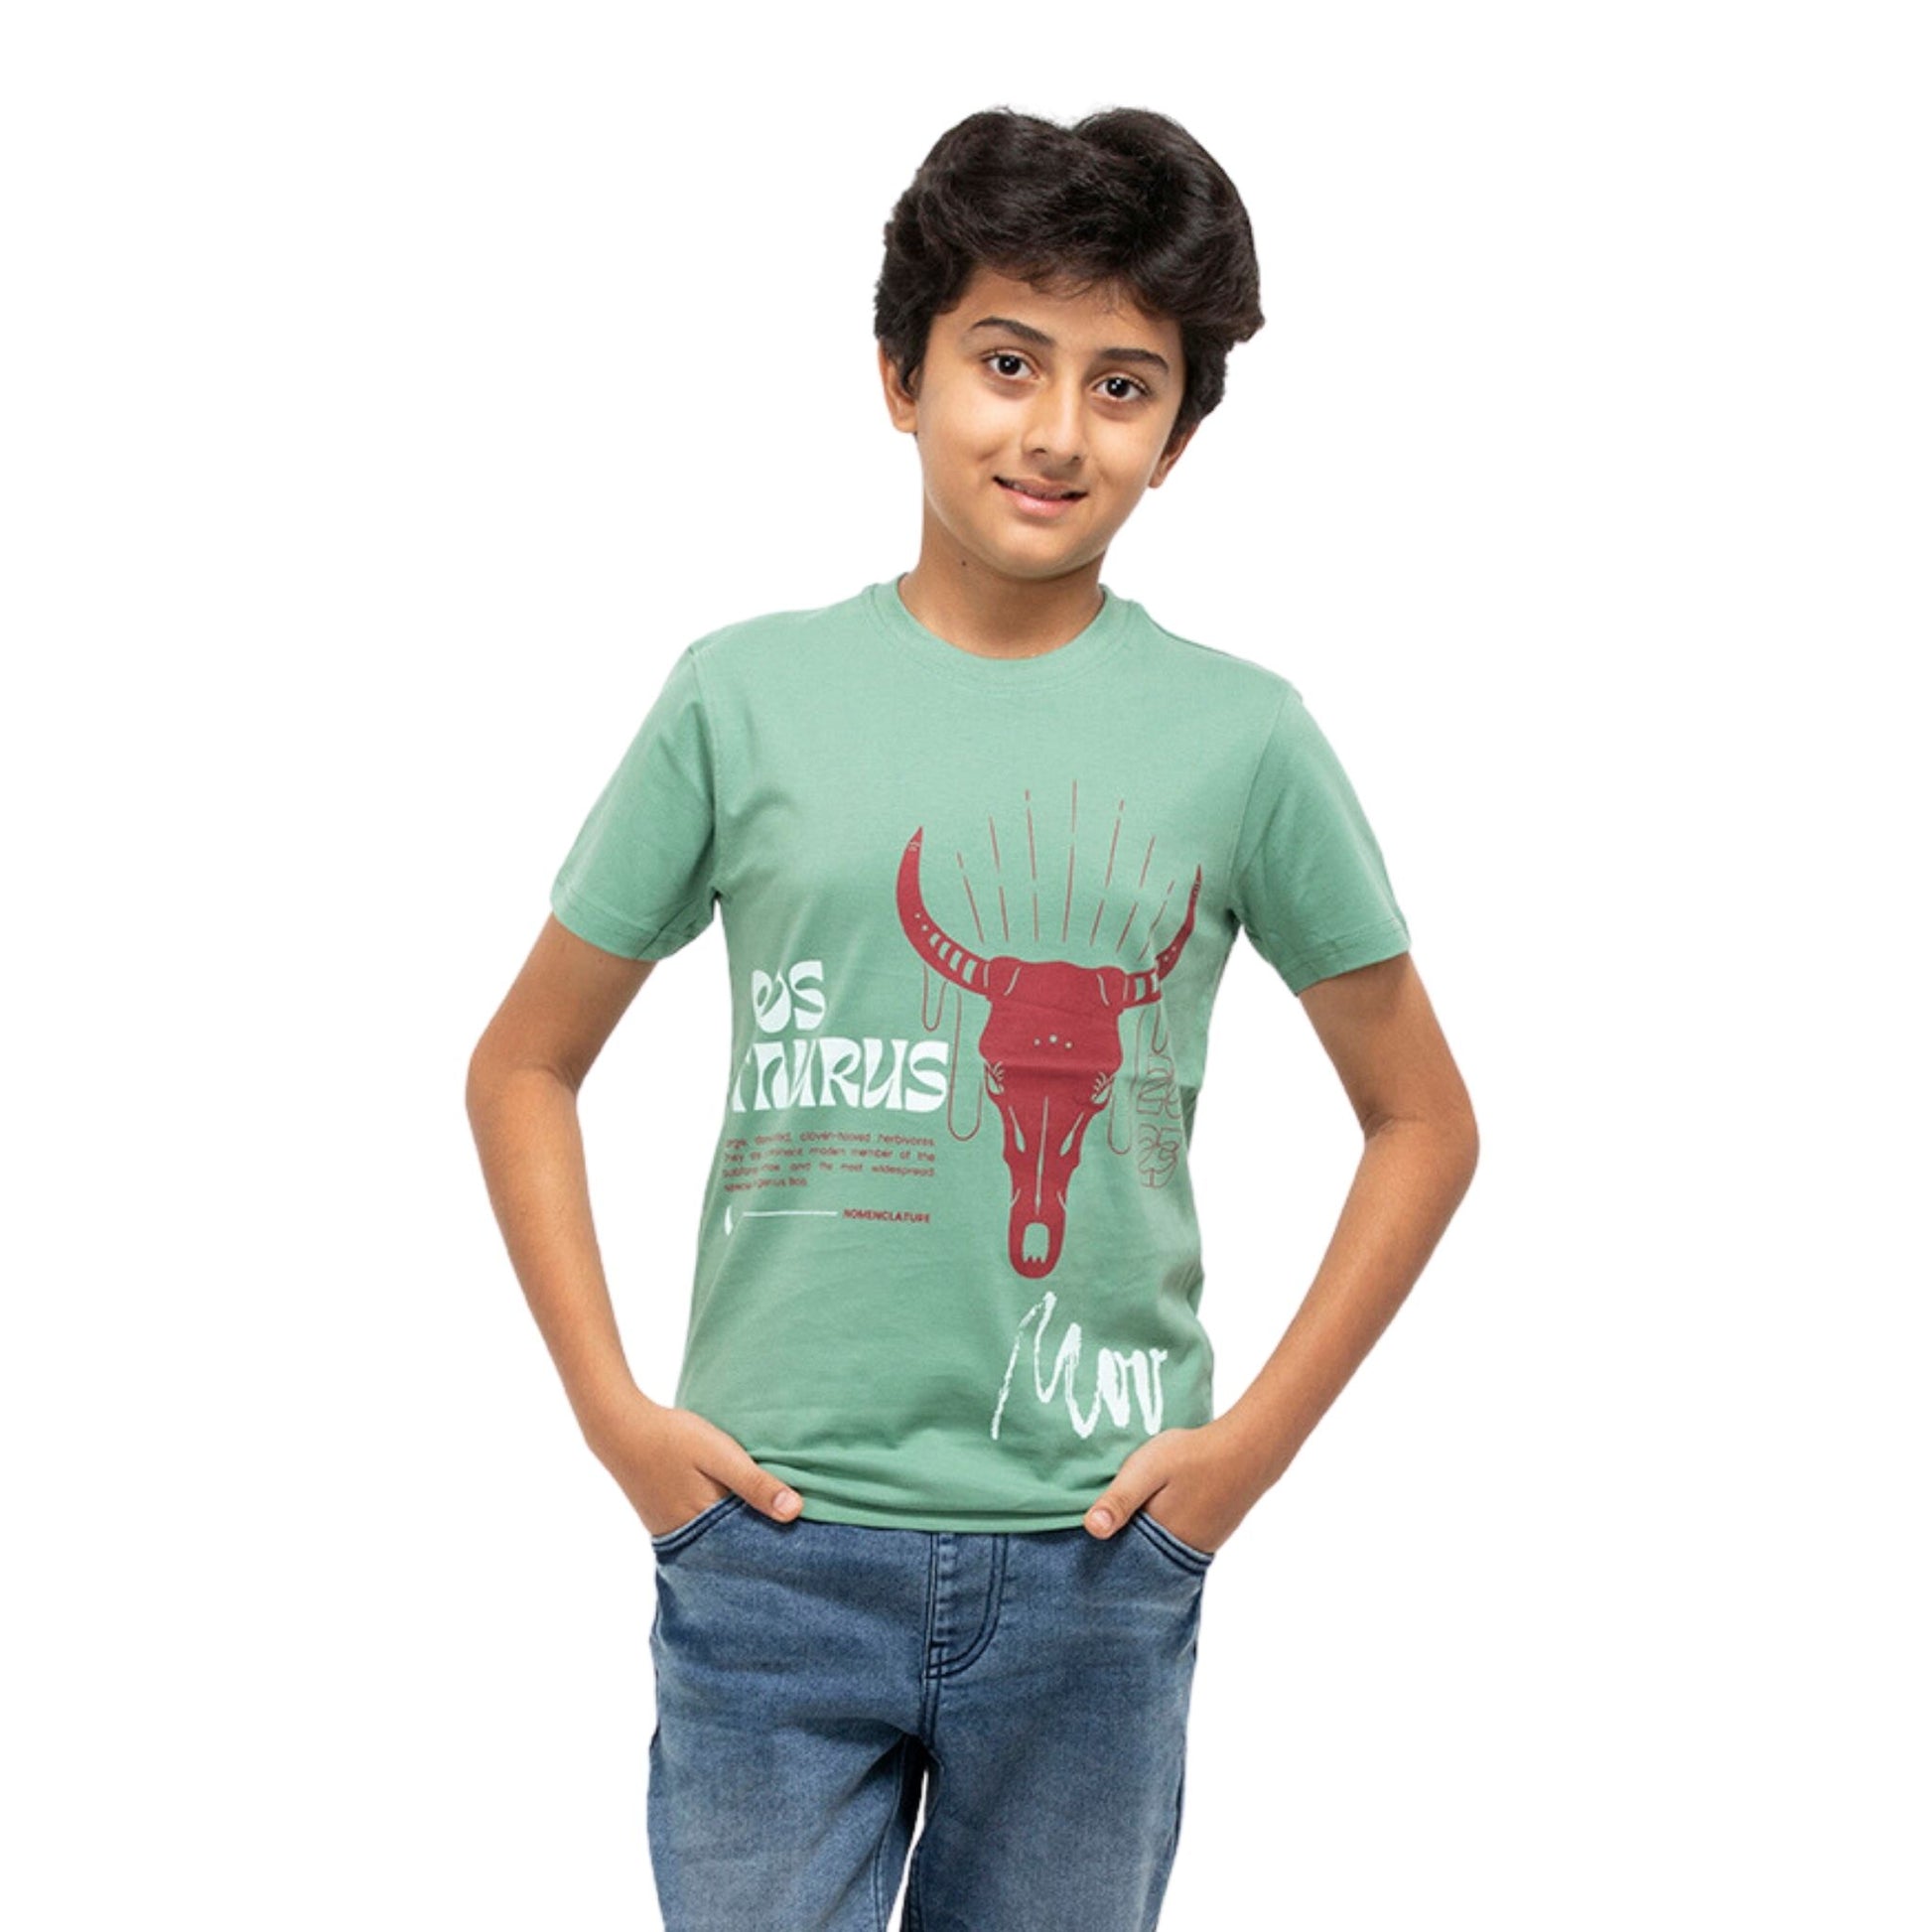 A Boy wearing stylish, affordable & premium Taurus Print Green Cotton T-Shirt from getstocked